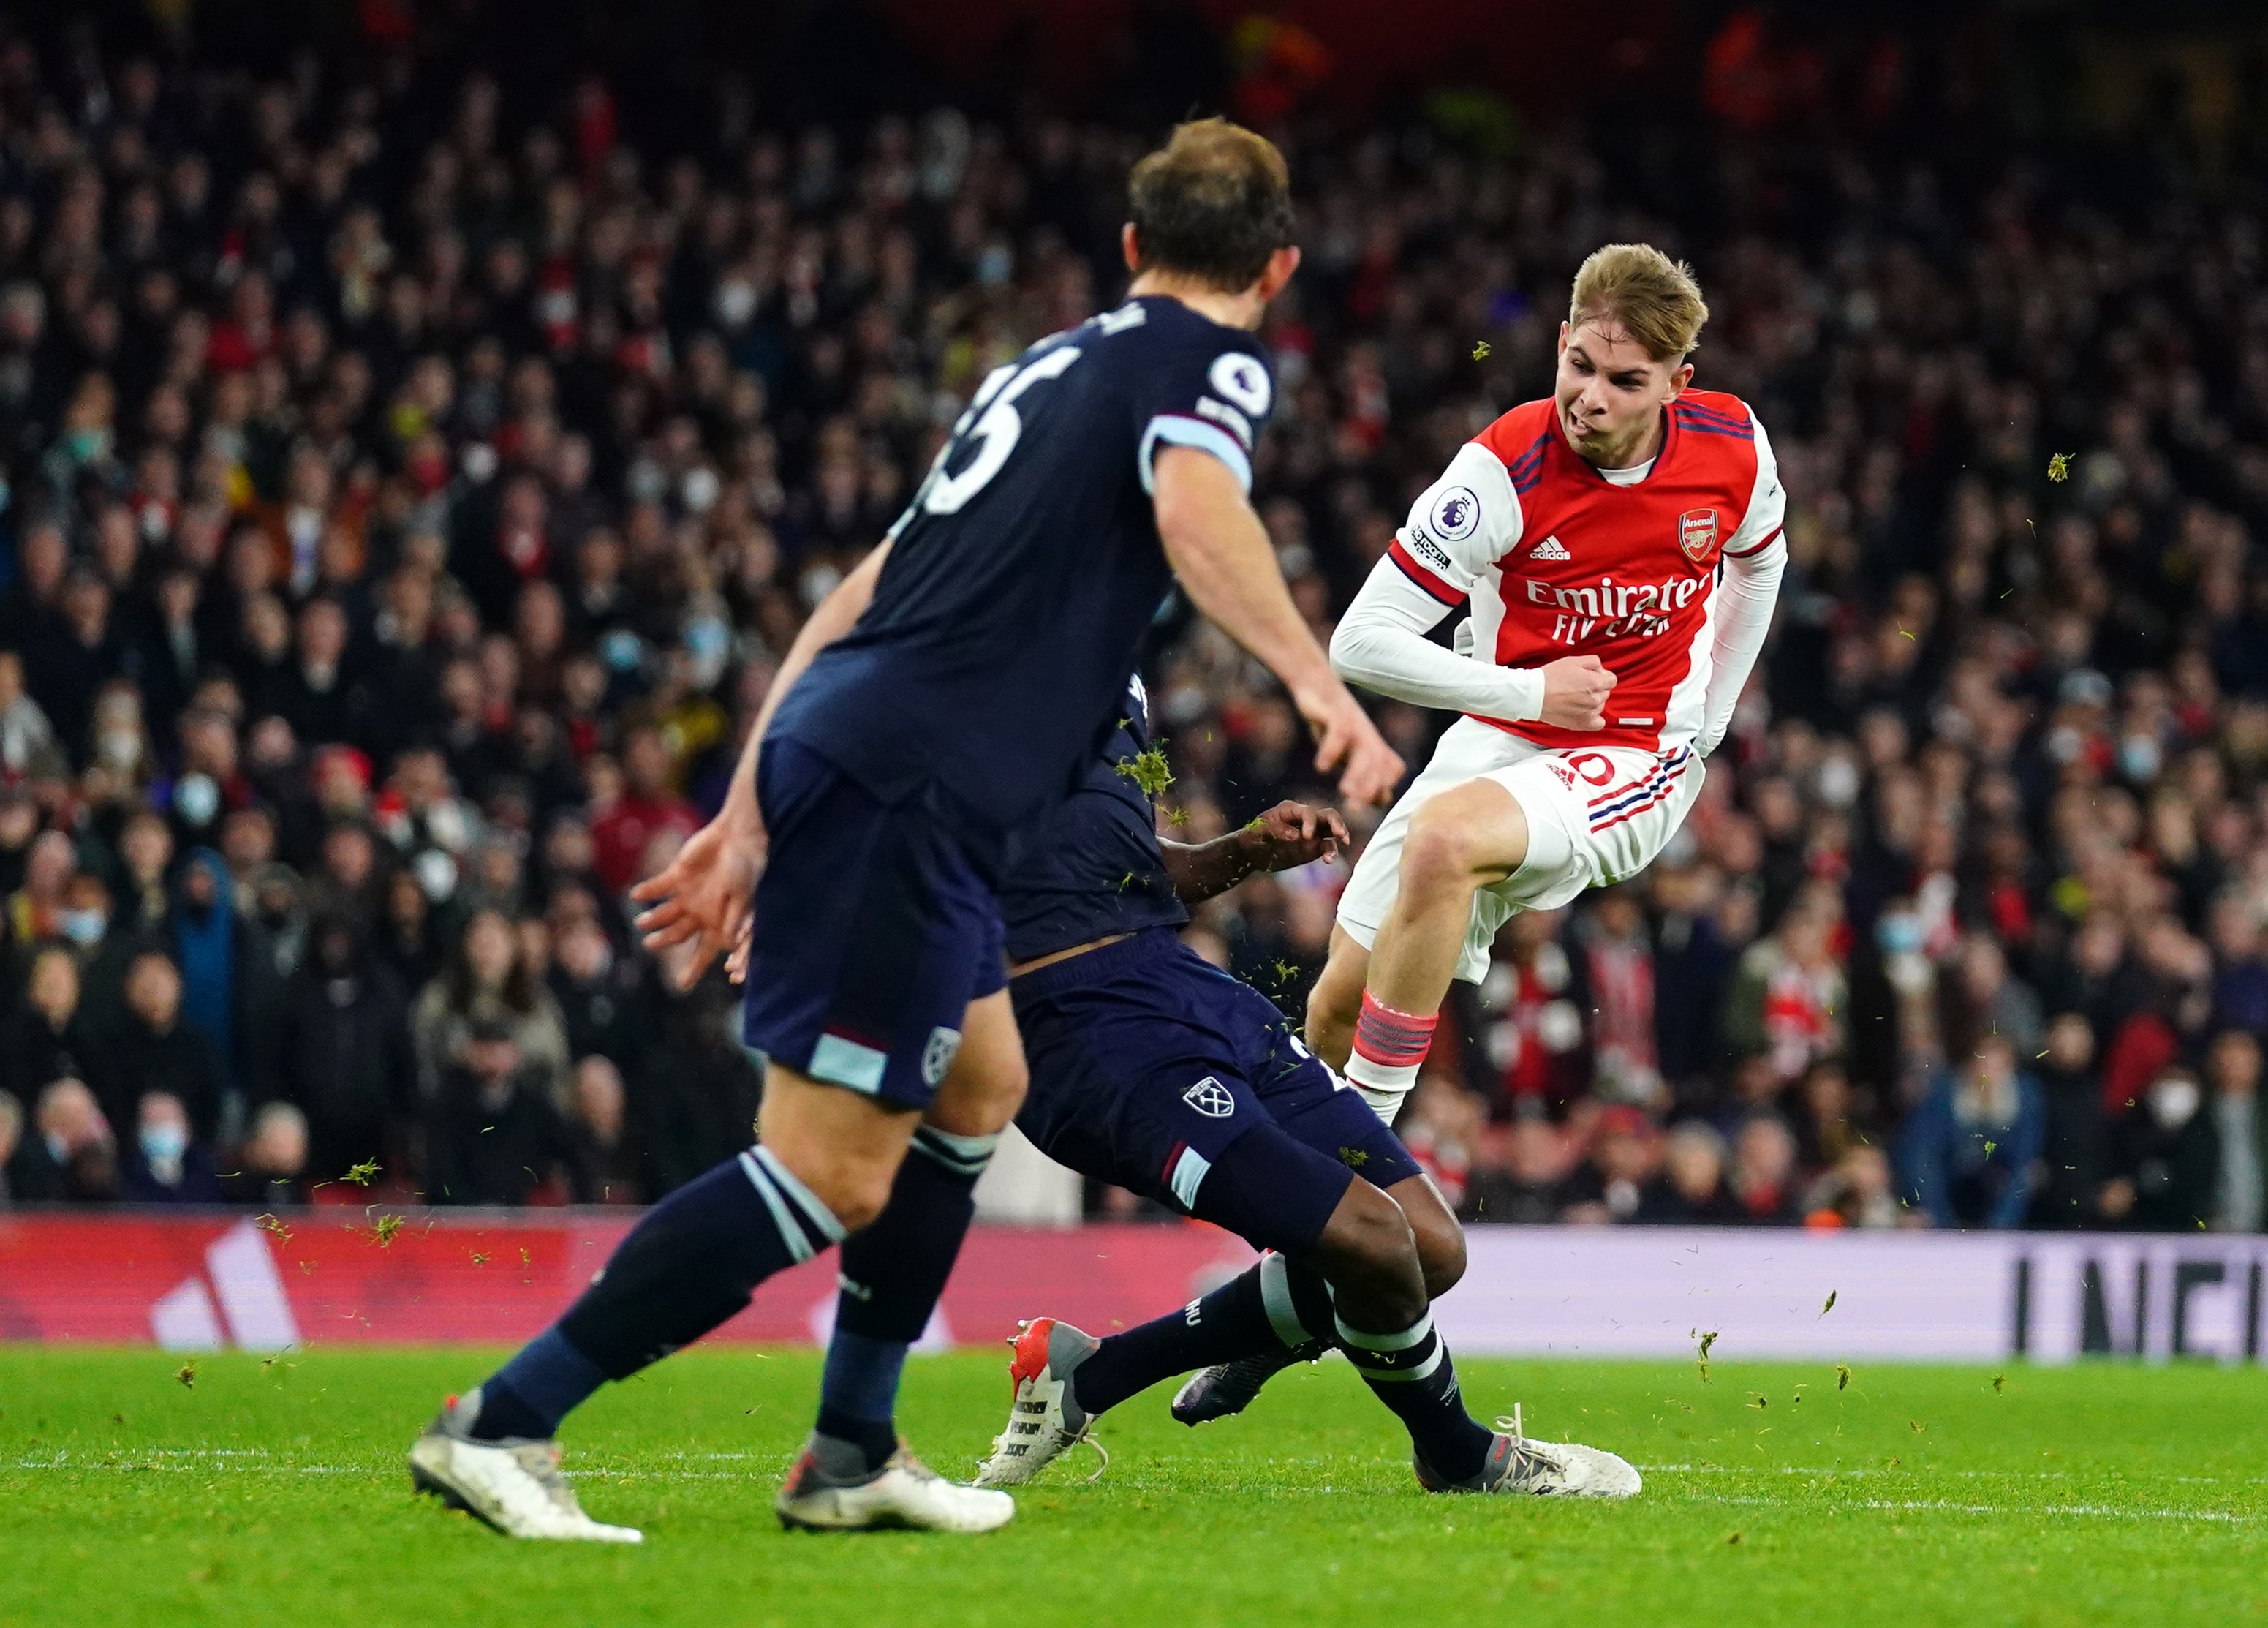 Emile Smith Rowe scored a late second goal as Arsenal beat West Ham (Nick Potts/PA)